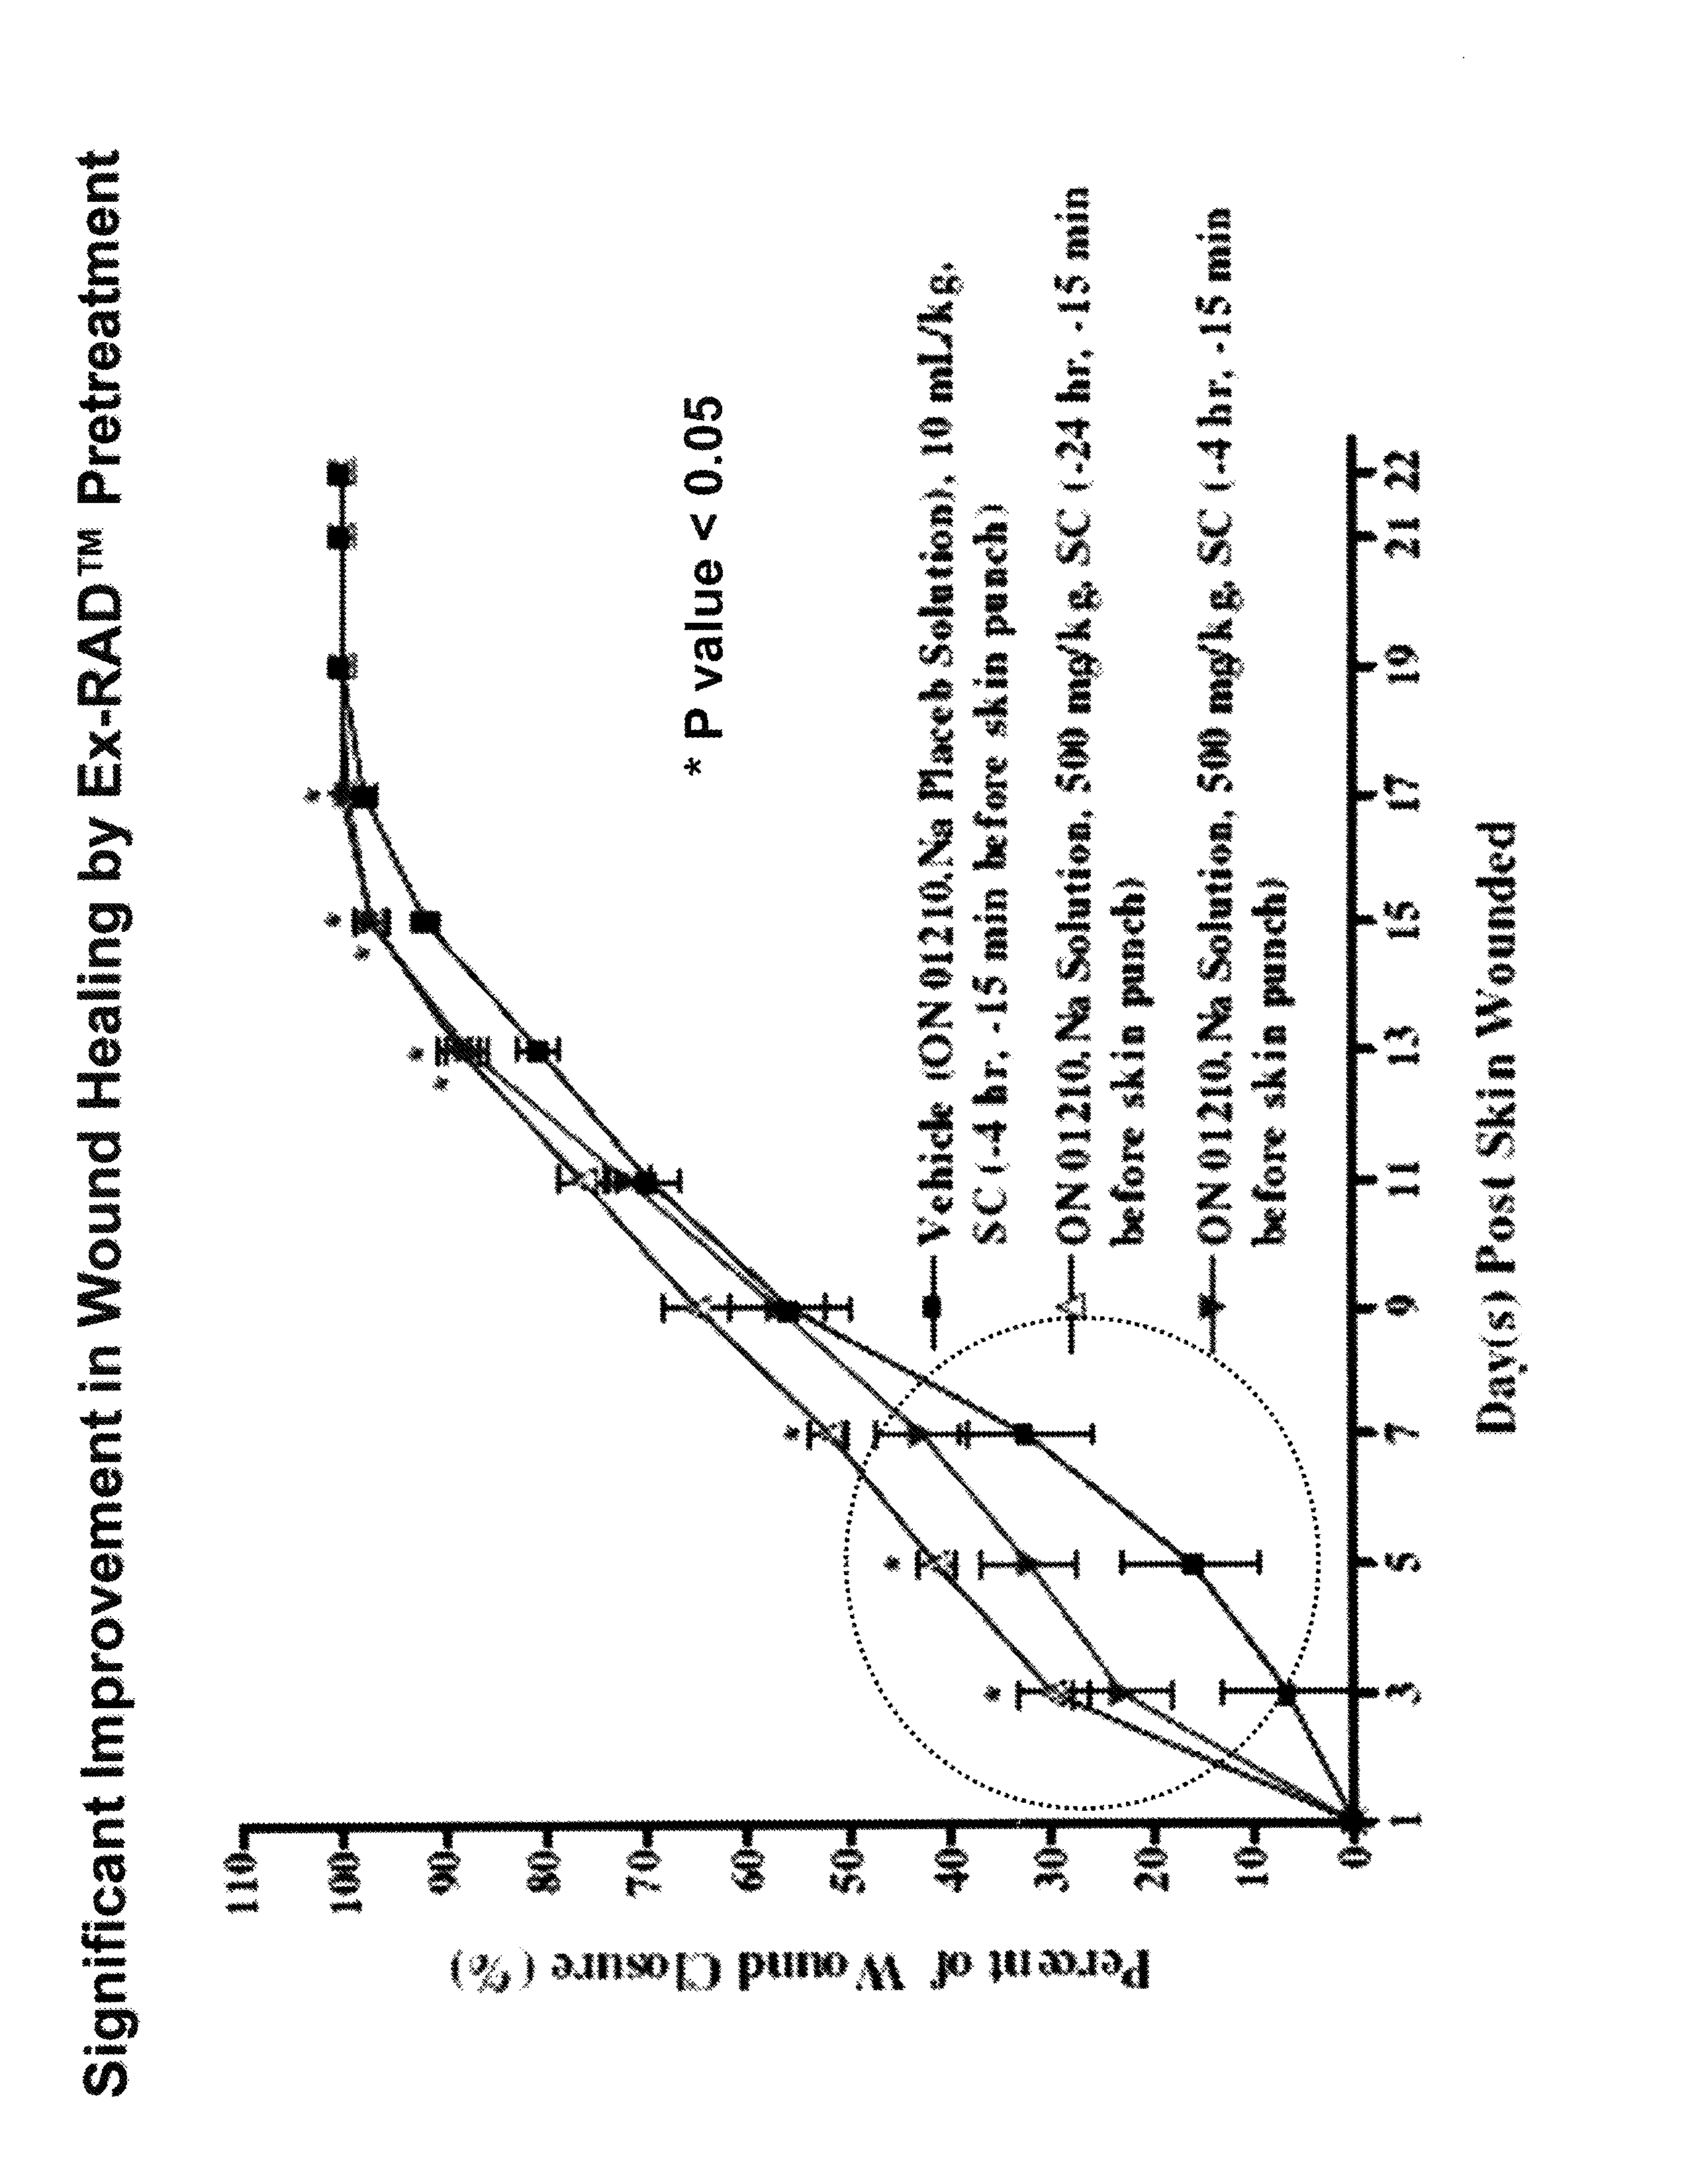 Compositions and methods for prevention and treatment of wounds